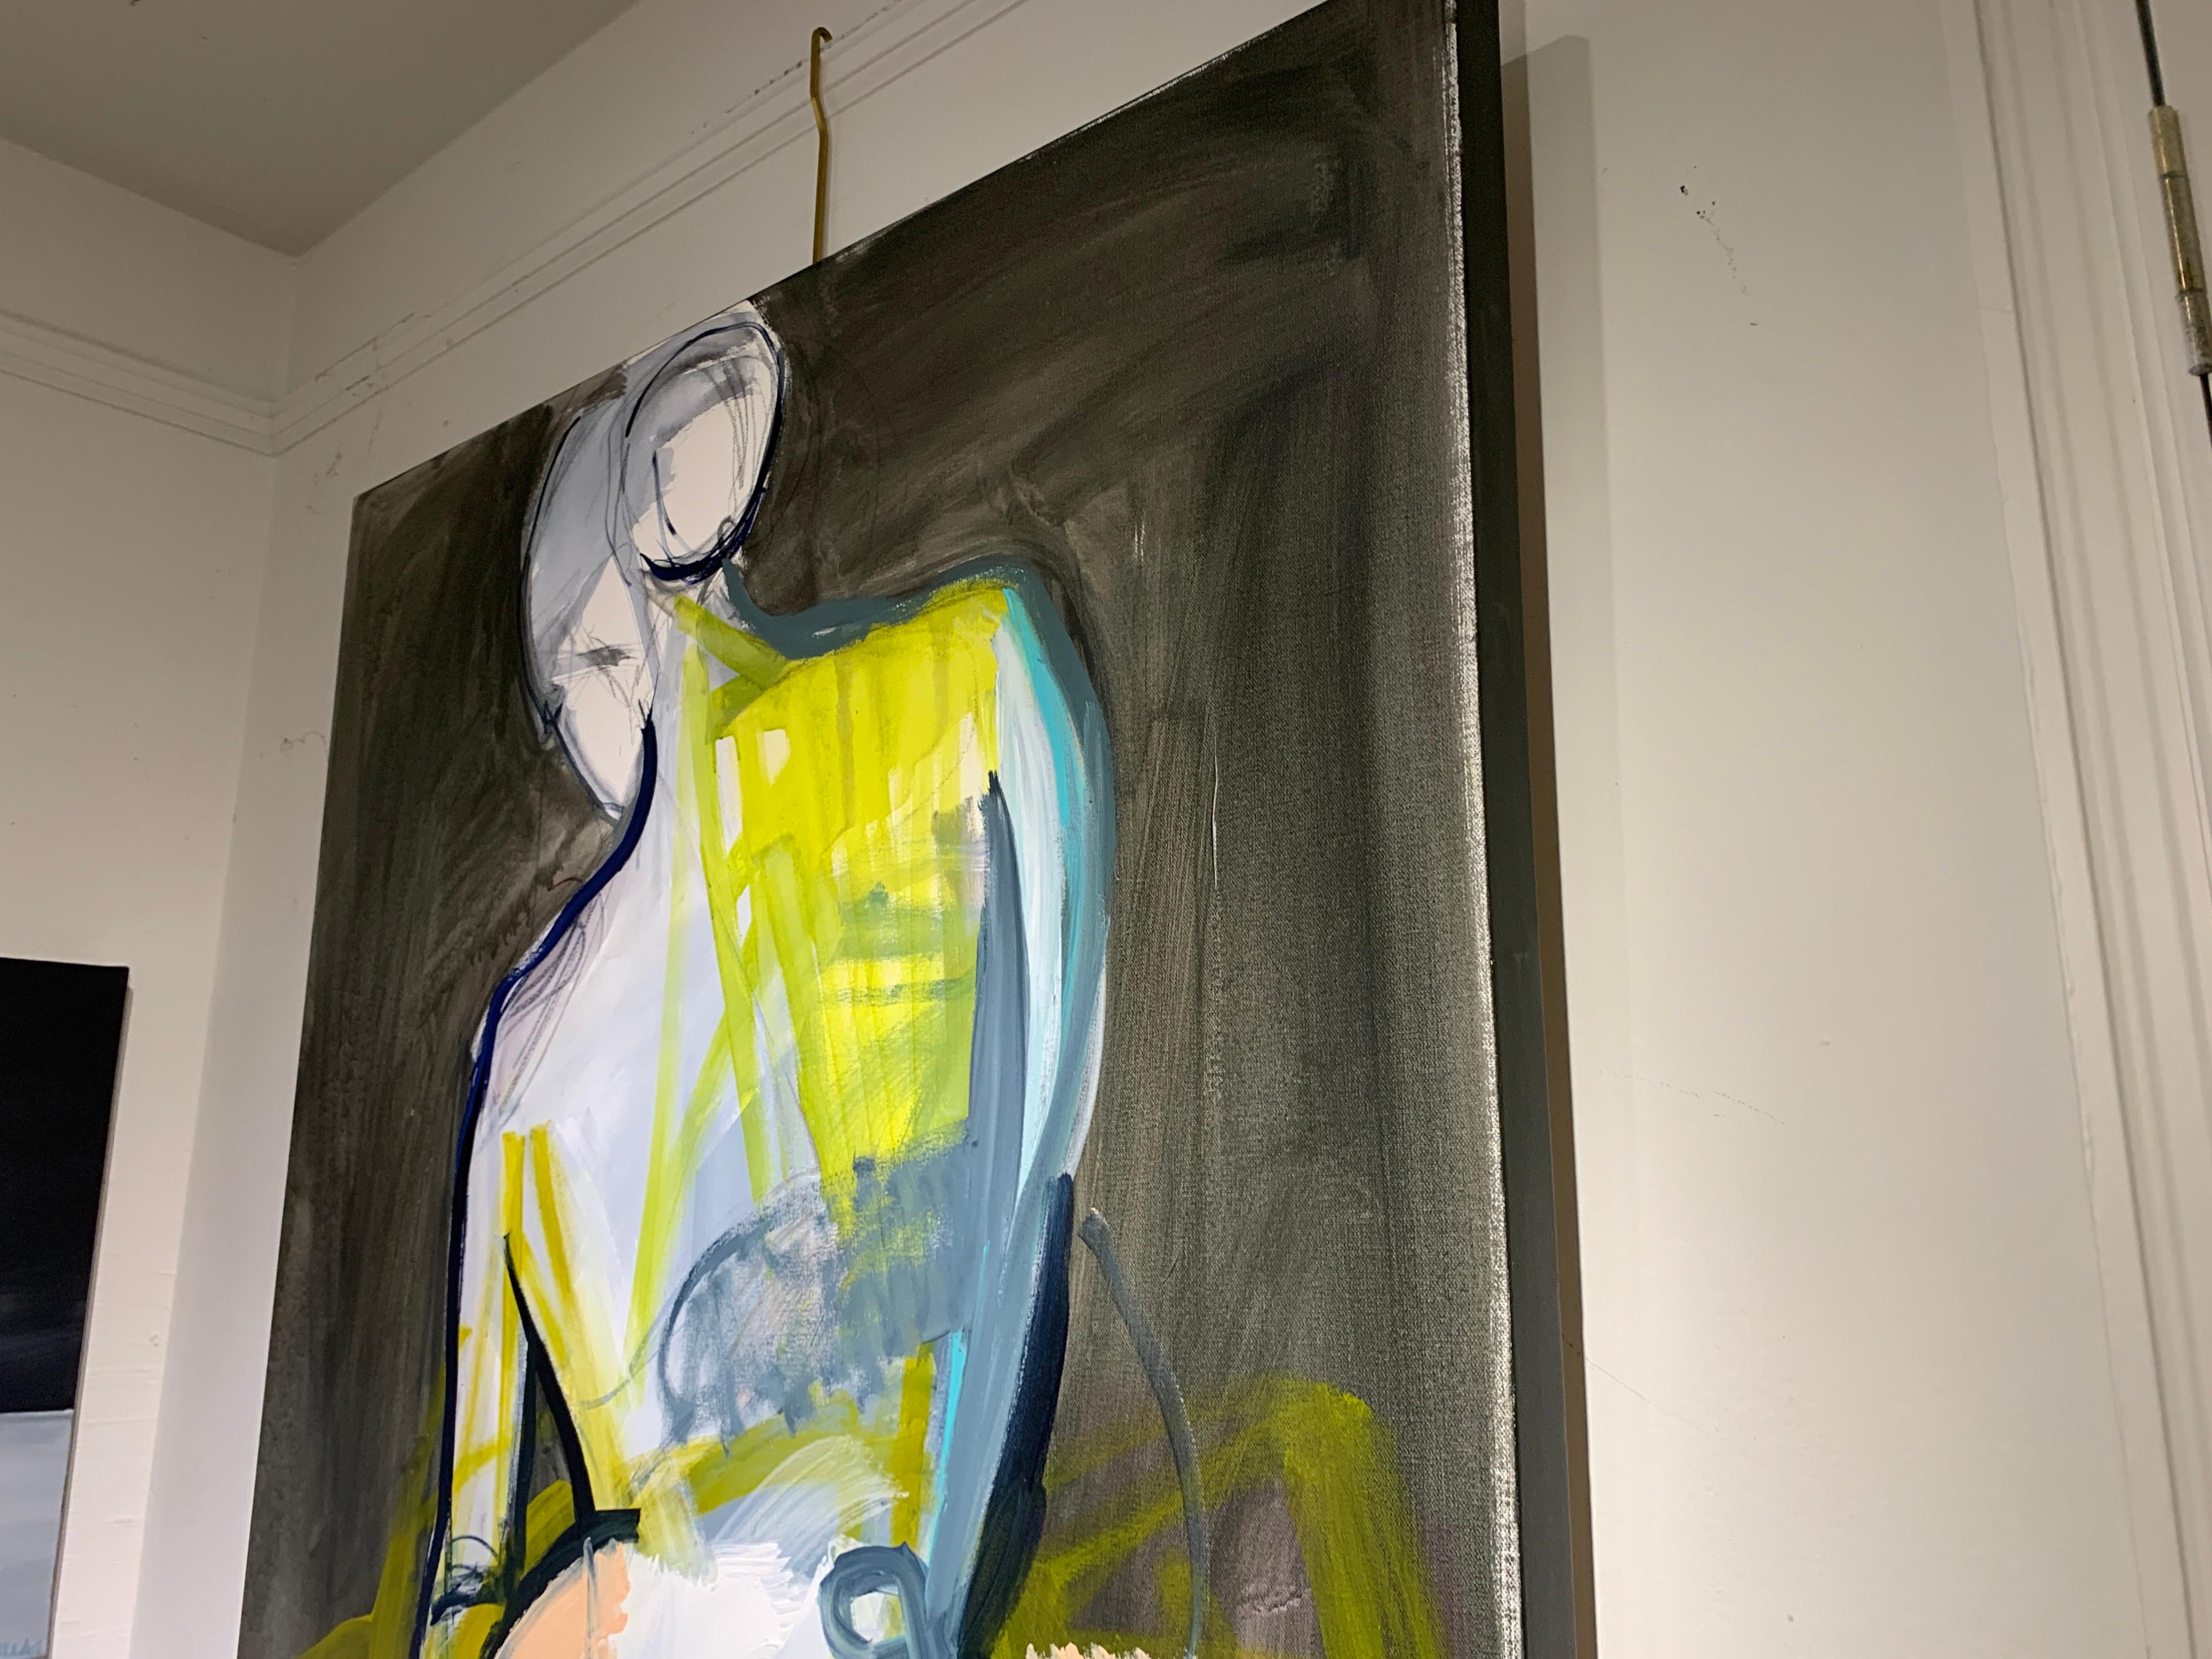 'Terrain' is a medium size mixed media on canvas abstracted nude painting created by American artist Kelley Ogburn in 2020. Featuring a palette made of blue, grey, green, white, black and pink tones, this painting draws our attention with its bold